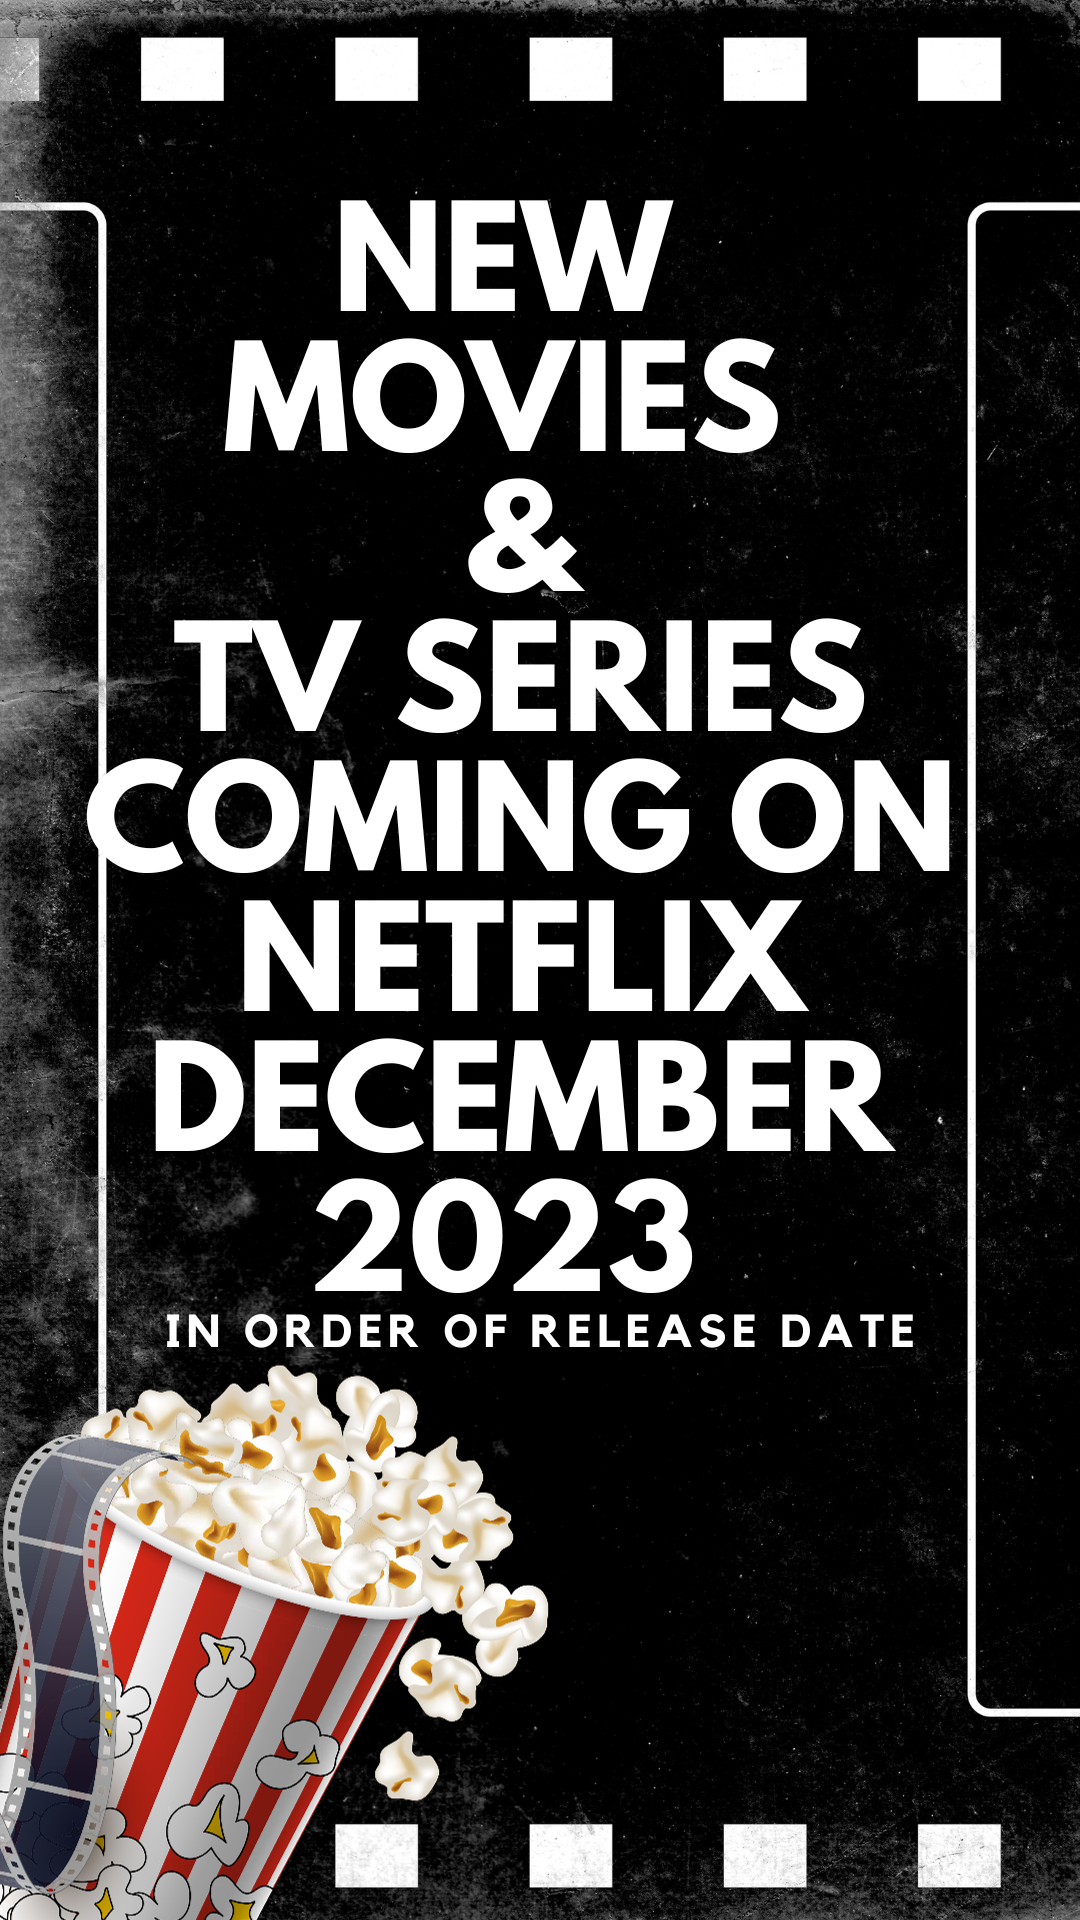 New Netflix Movies, TV Shows in December 2023